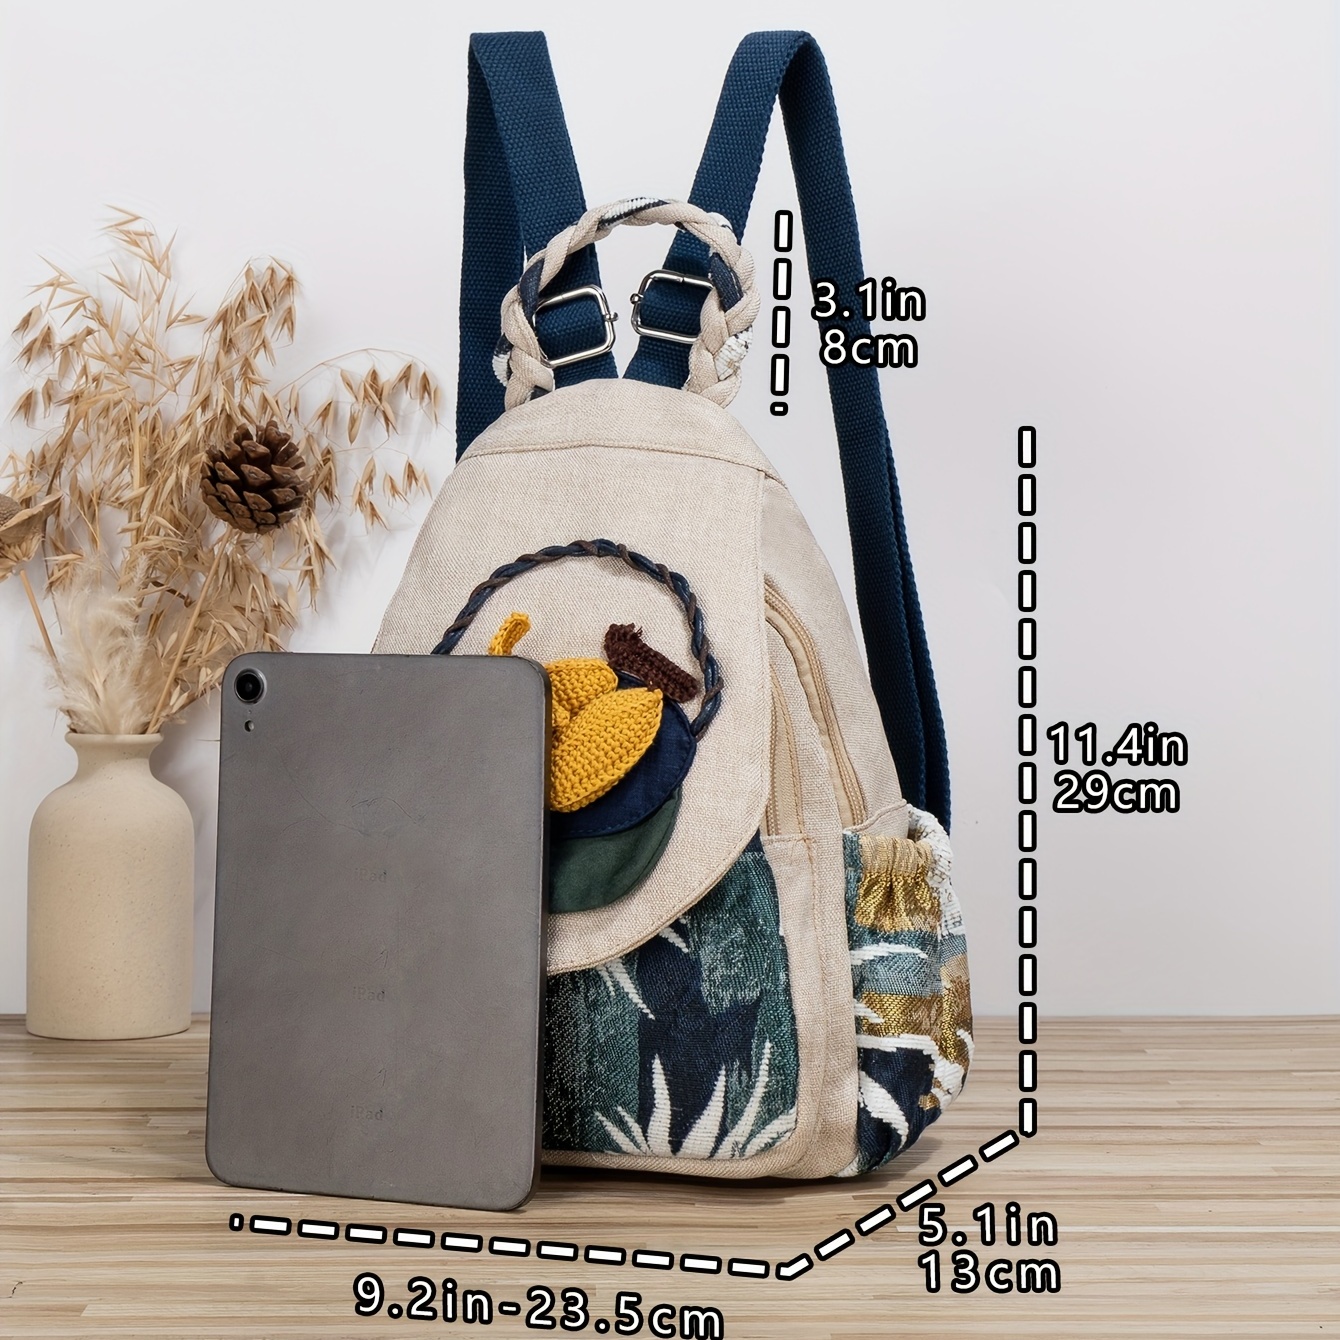  UTO Sling Bag for Women Crossbody Trendy Chest Belt Bag  Convertible Backpack Purse with Wide Shoulder Zip Straps : Clothing, Shoes  & Jewelry